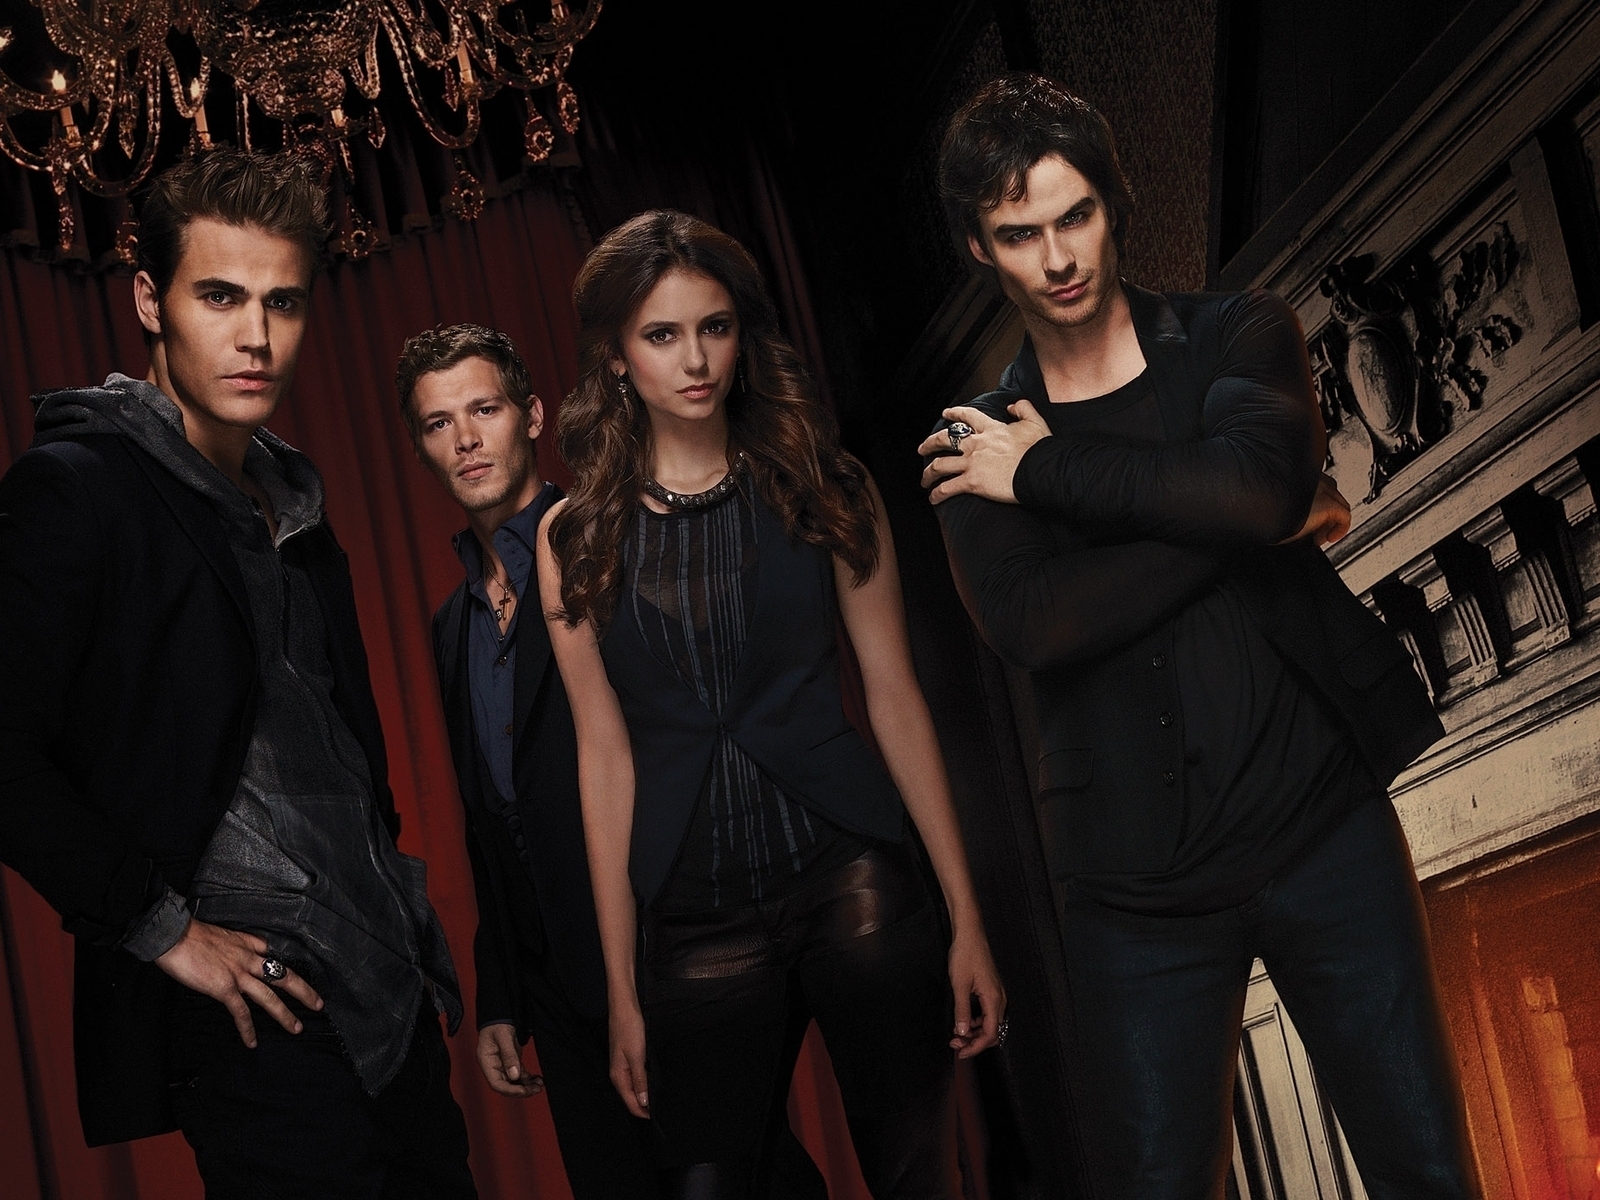 The Vampire Diaries Actors for 1600 x 1200 resolution